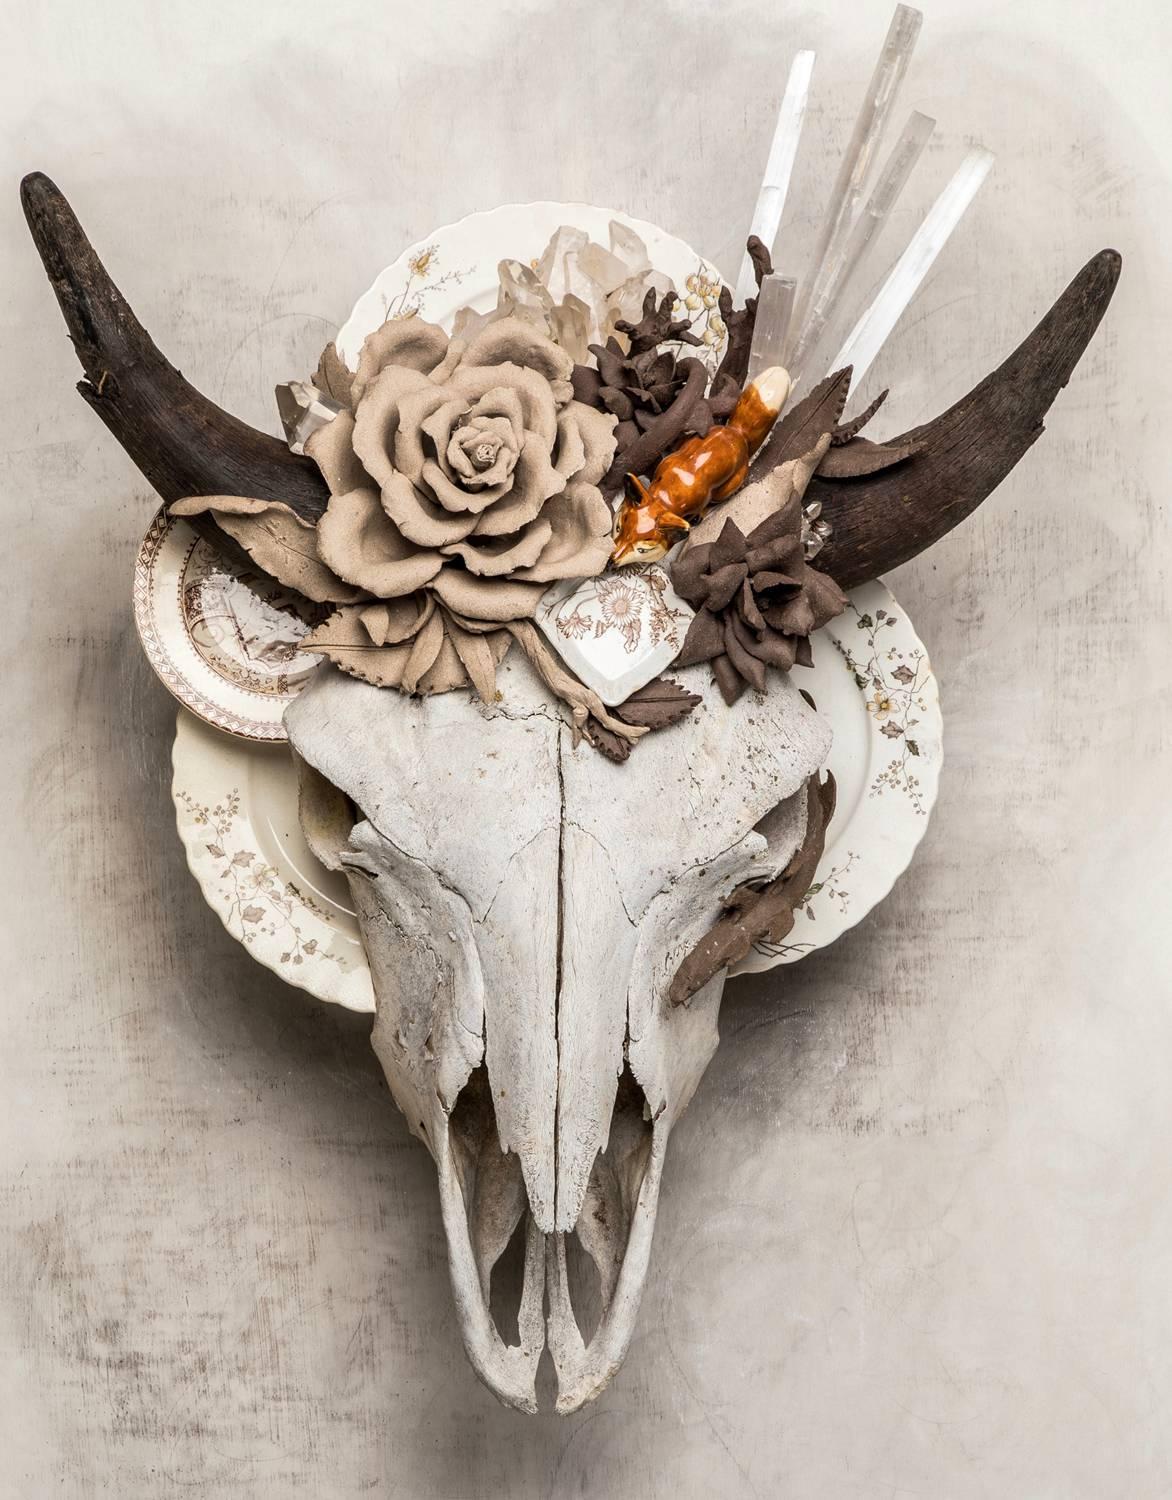 "Winter Solstice" sculpture, skull, found objects, handmade porcelain flowers - Sculpture by Marcy Lally